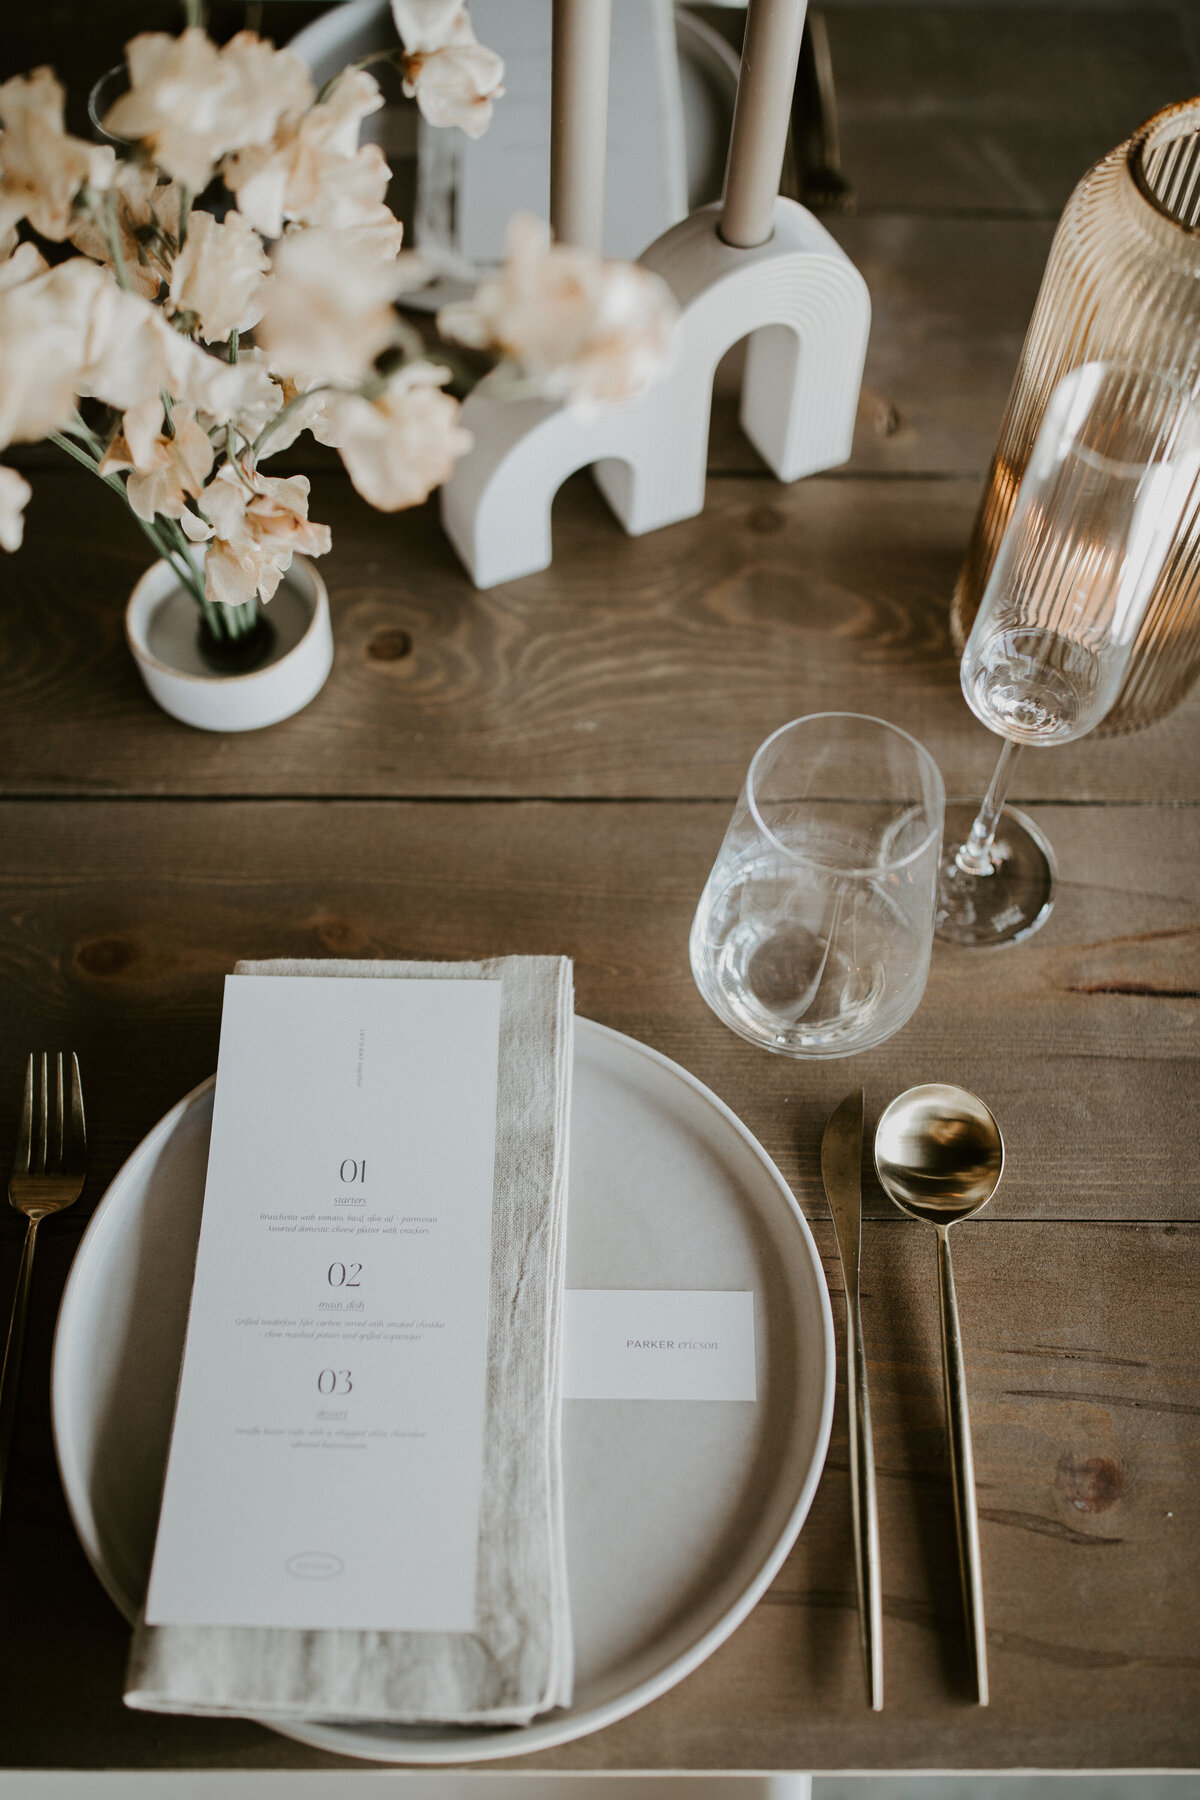 White dinner menu with black font atop a white linen napkin and white plate set on a wooden table.